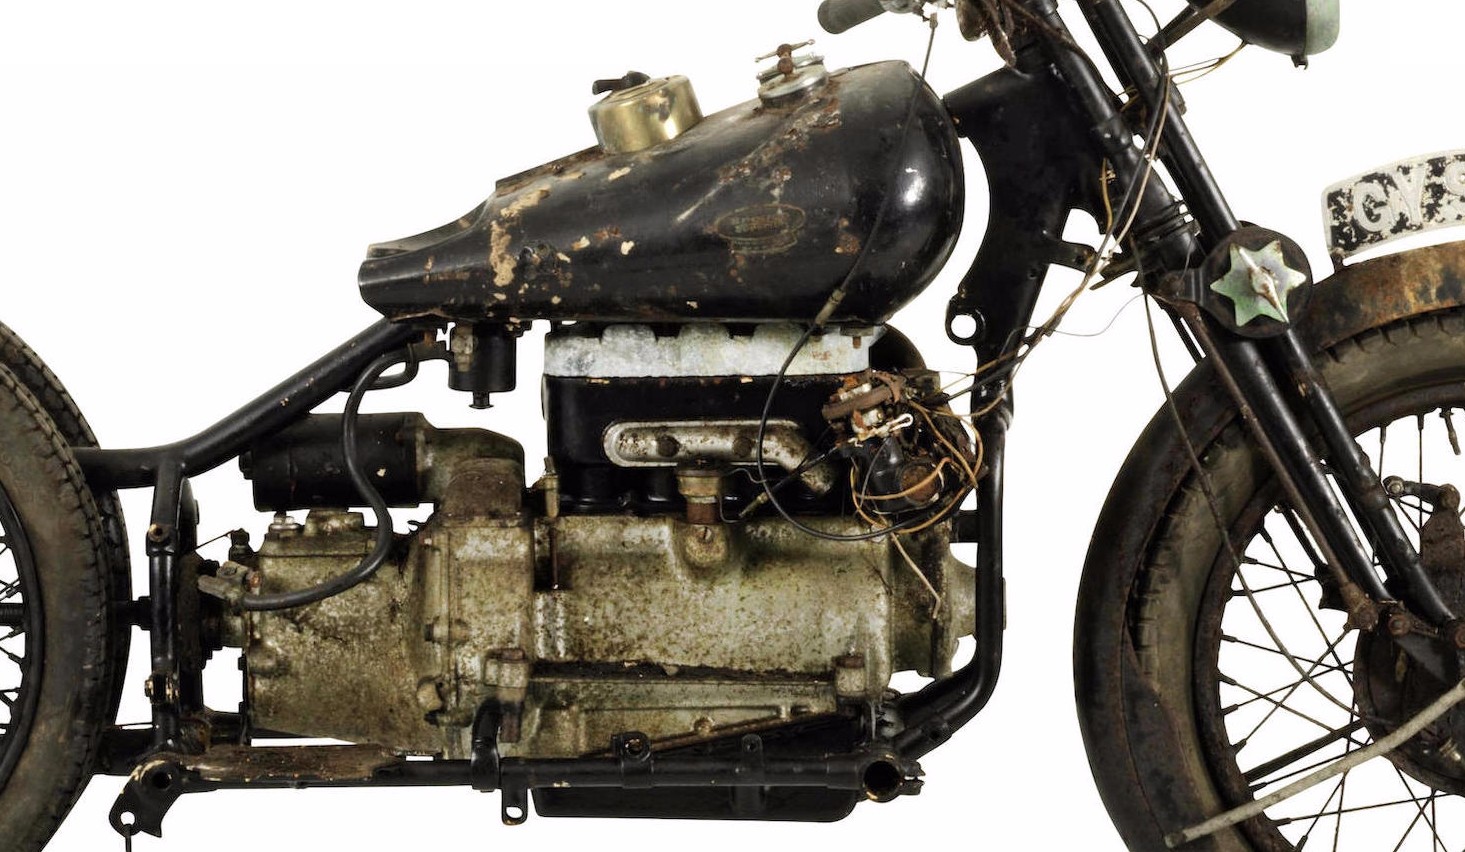 old-brough-superior-bikes-thought-lost-discovered-now-worth-a-small-fortune-photo-gallery_11-autonovosti.me-7